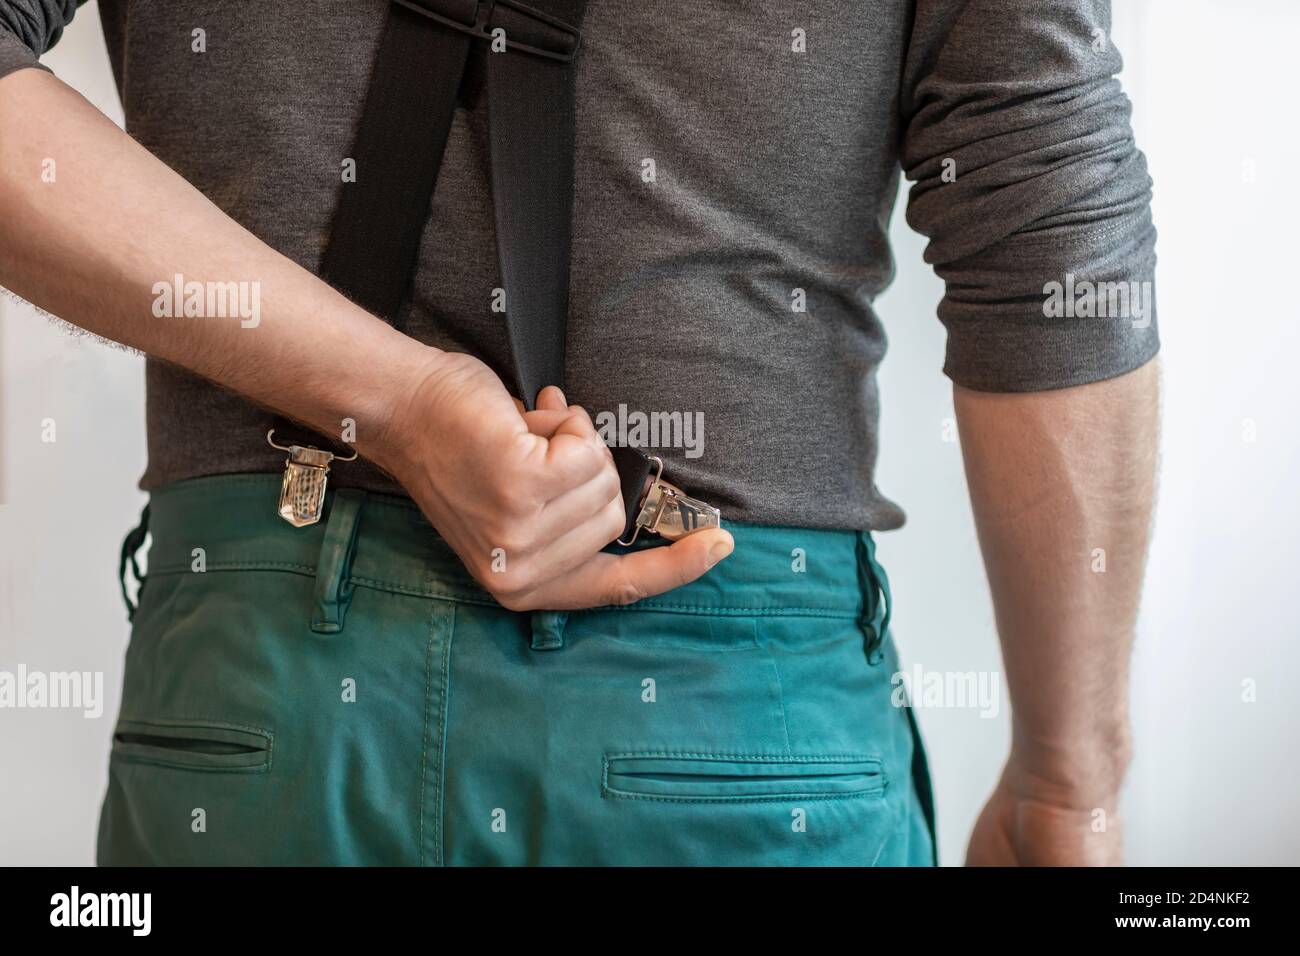 A man holding a clip of his suspenders and attaching it to his green trousers. Modern hipster formal fashion style. Close-up of a hand and clothing Stock Photo